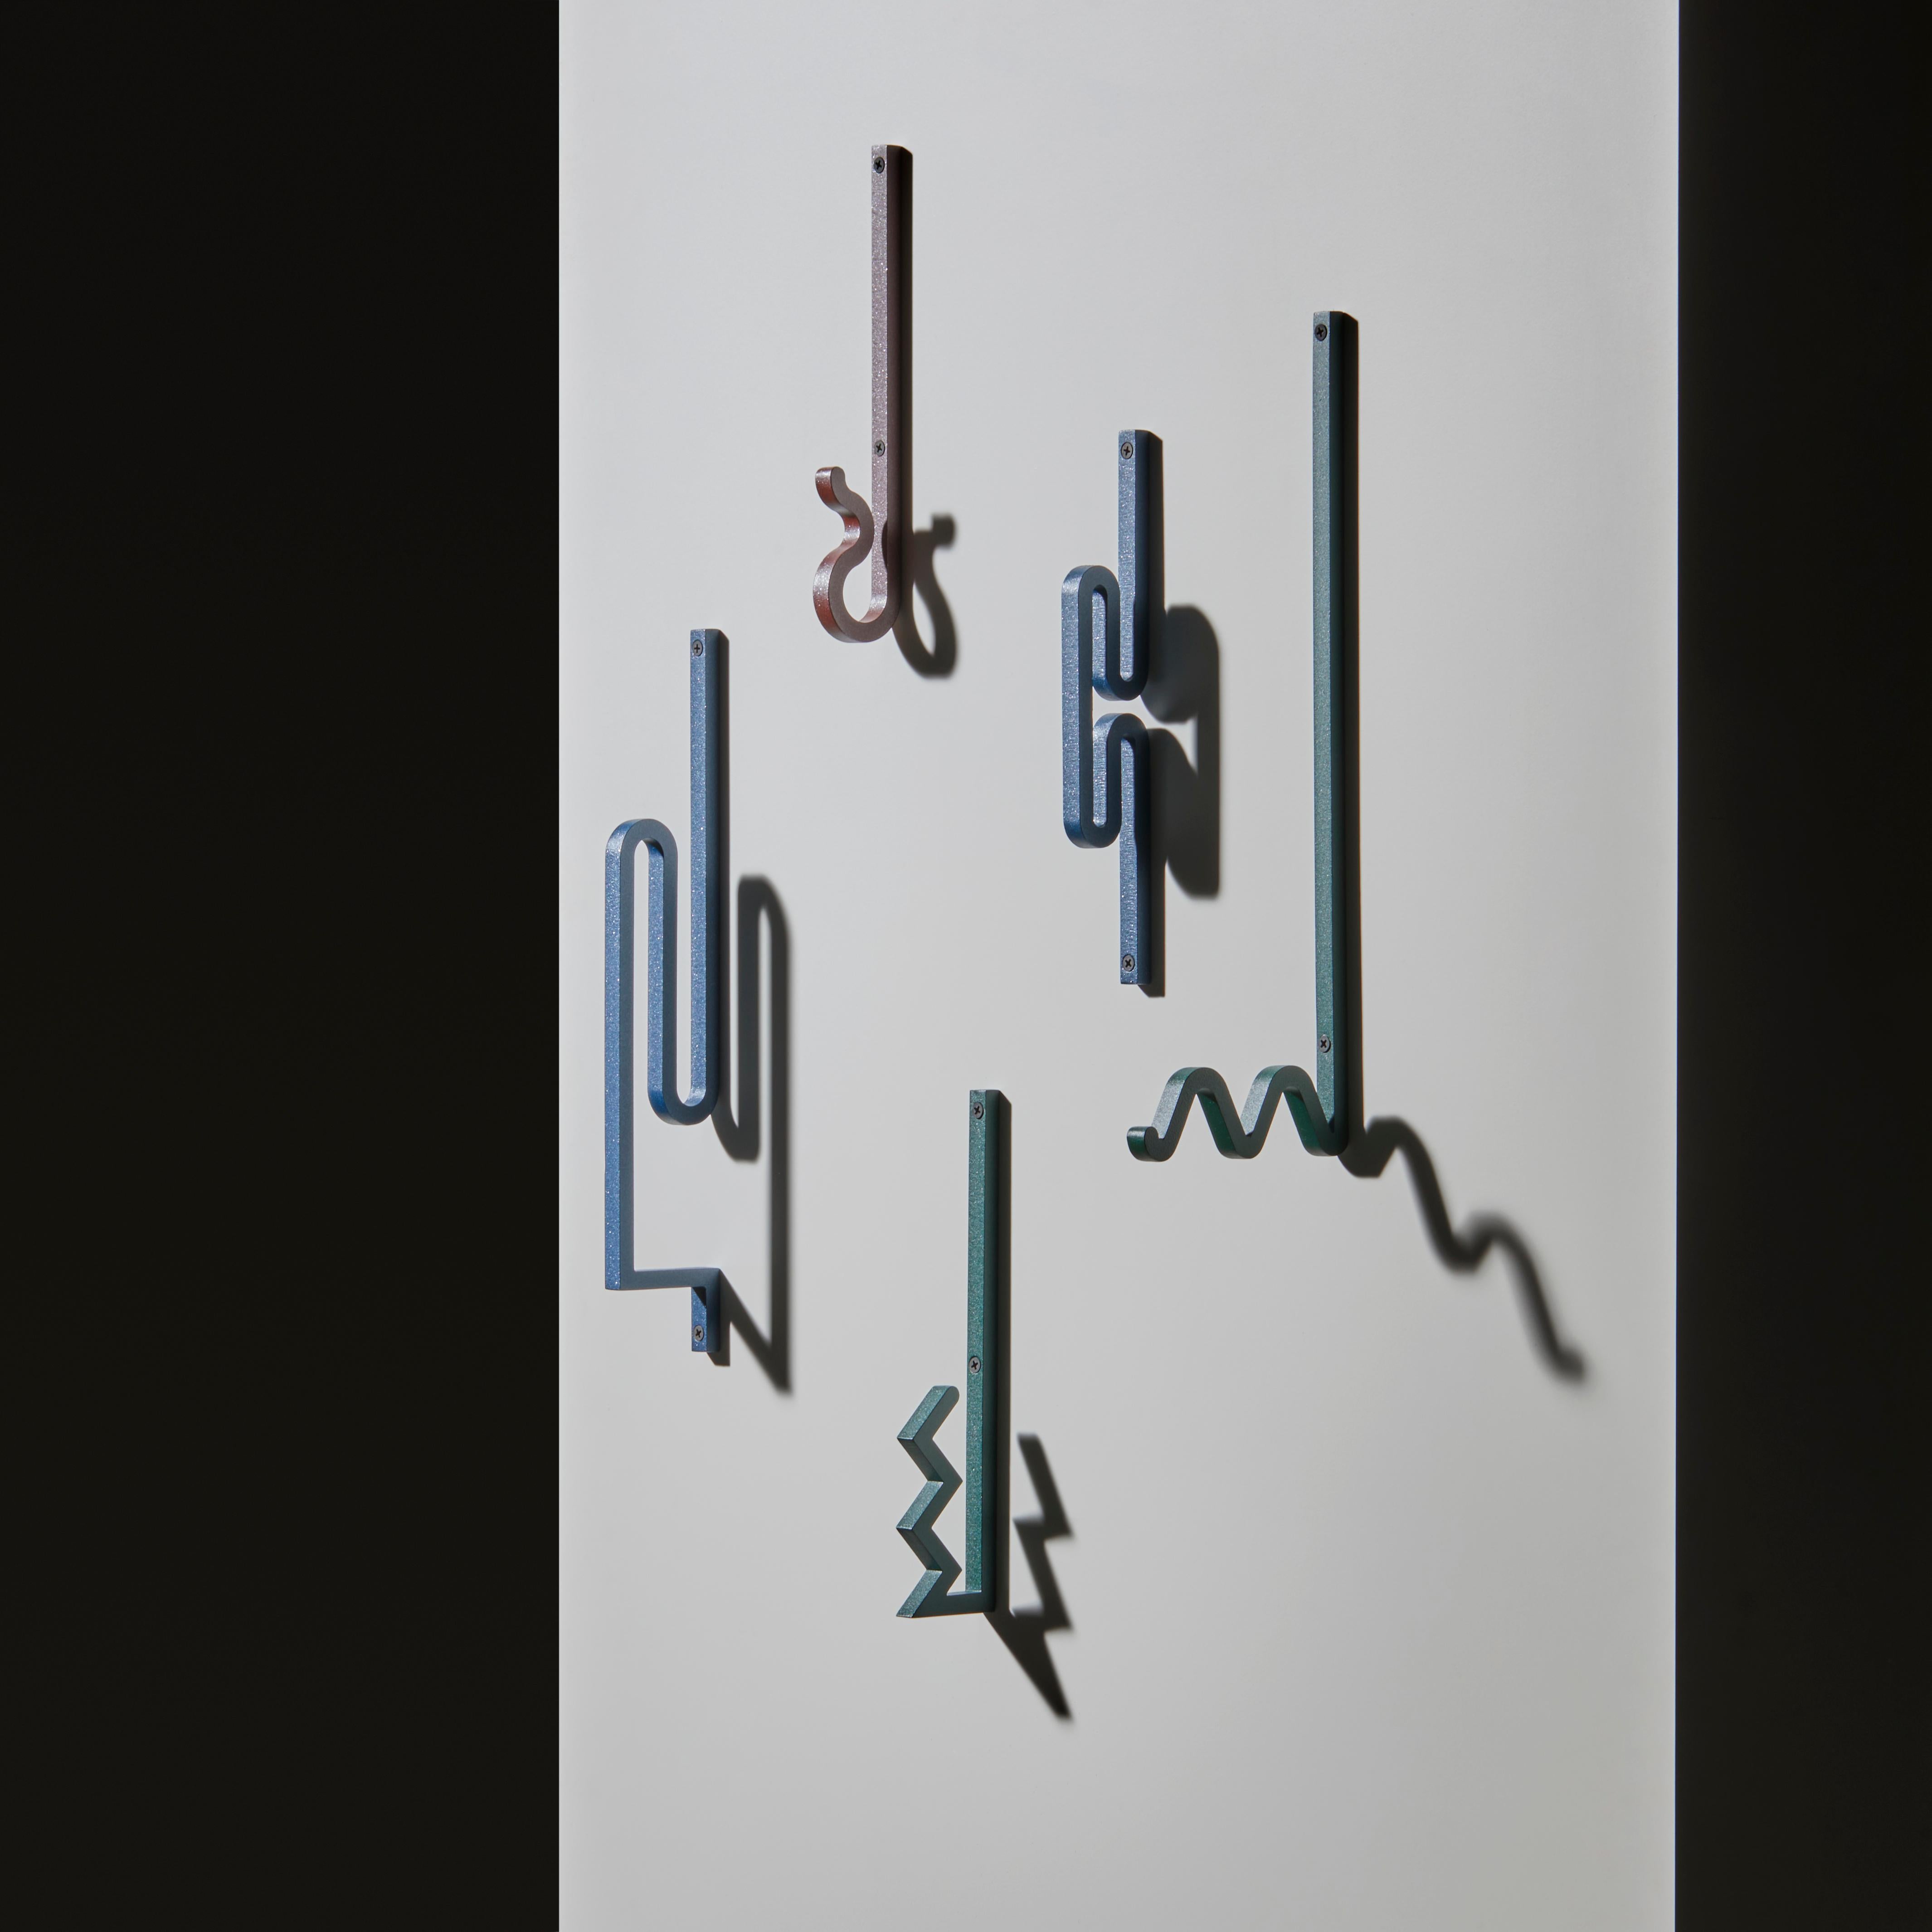 Zag is a family of coat hooks. Their varied shapes are inspired by barrettes, pins, or twisted metal rods combined to create a graphic composition. Each element offers a different way to hang your clothes, your bag, or any accessory.
The modern